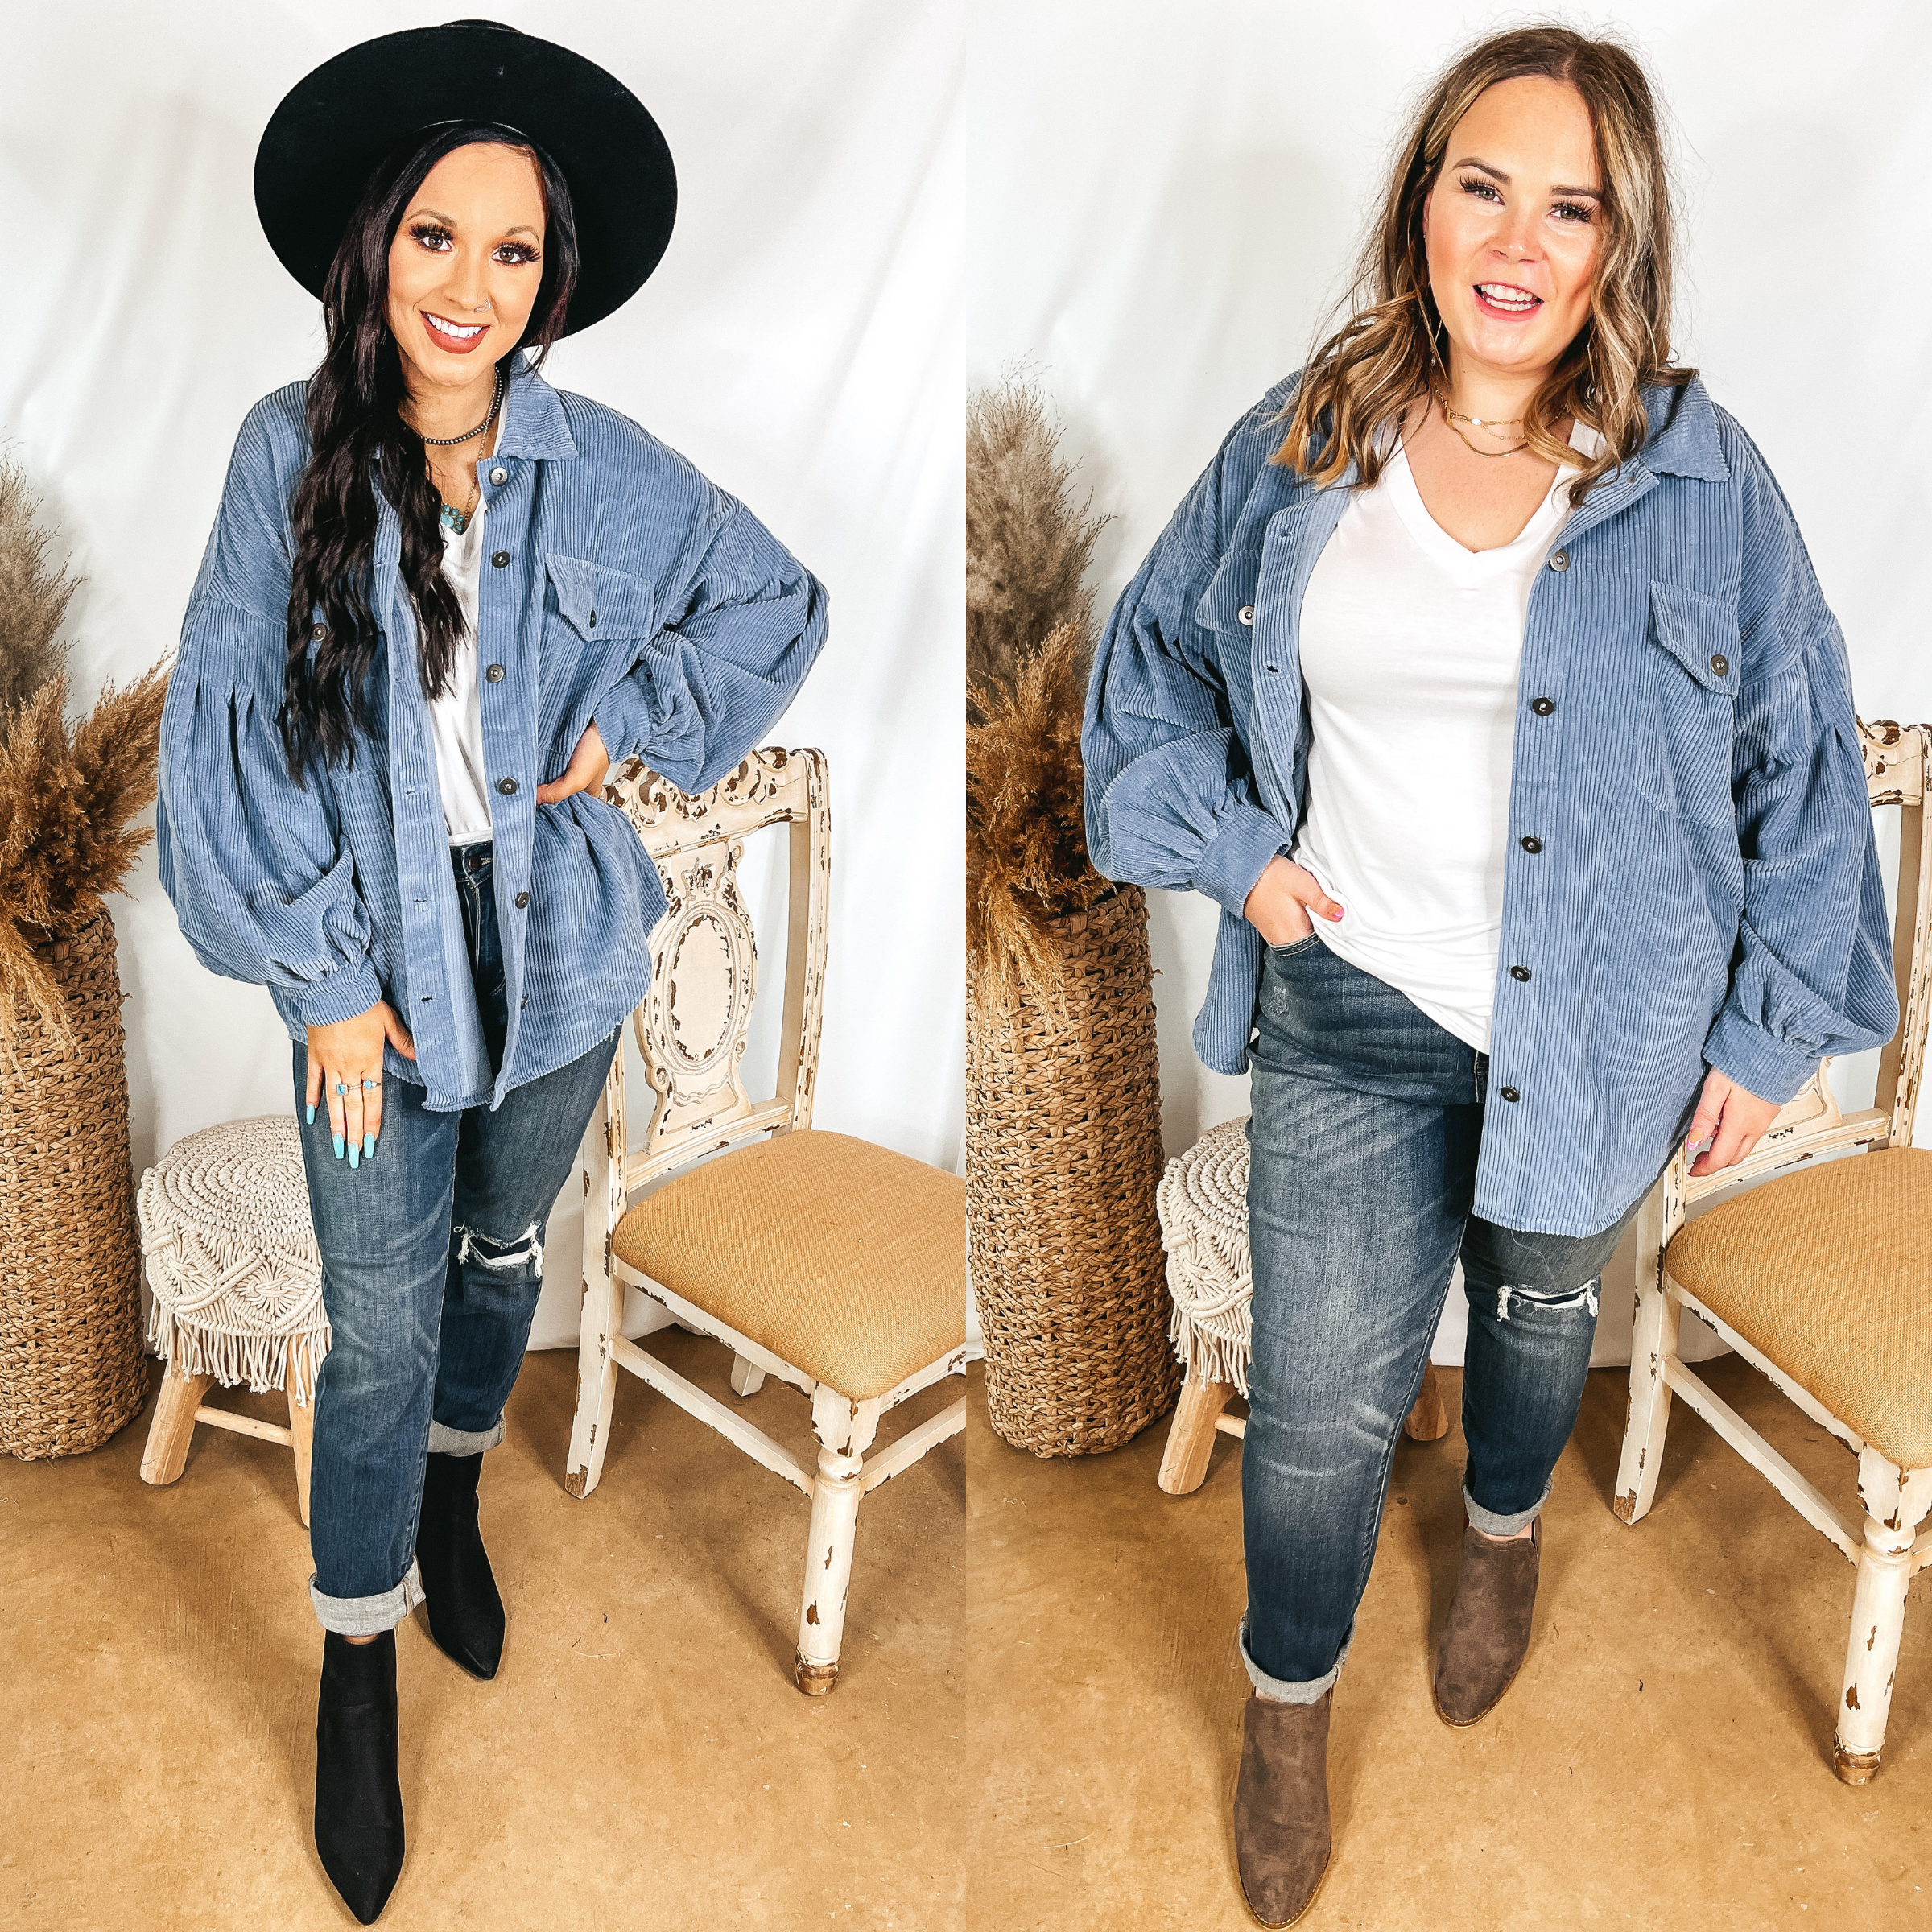 Models are wearing a dusty blue shacket that is a corduroy material. Both models have it paired with dark wash jeans. Size small model has it paired with black booties and a black hat. Size large model has it paired with brown booties and gold jewelry.